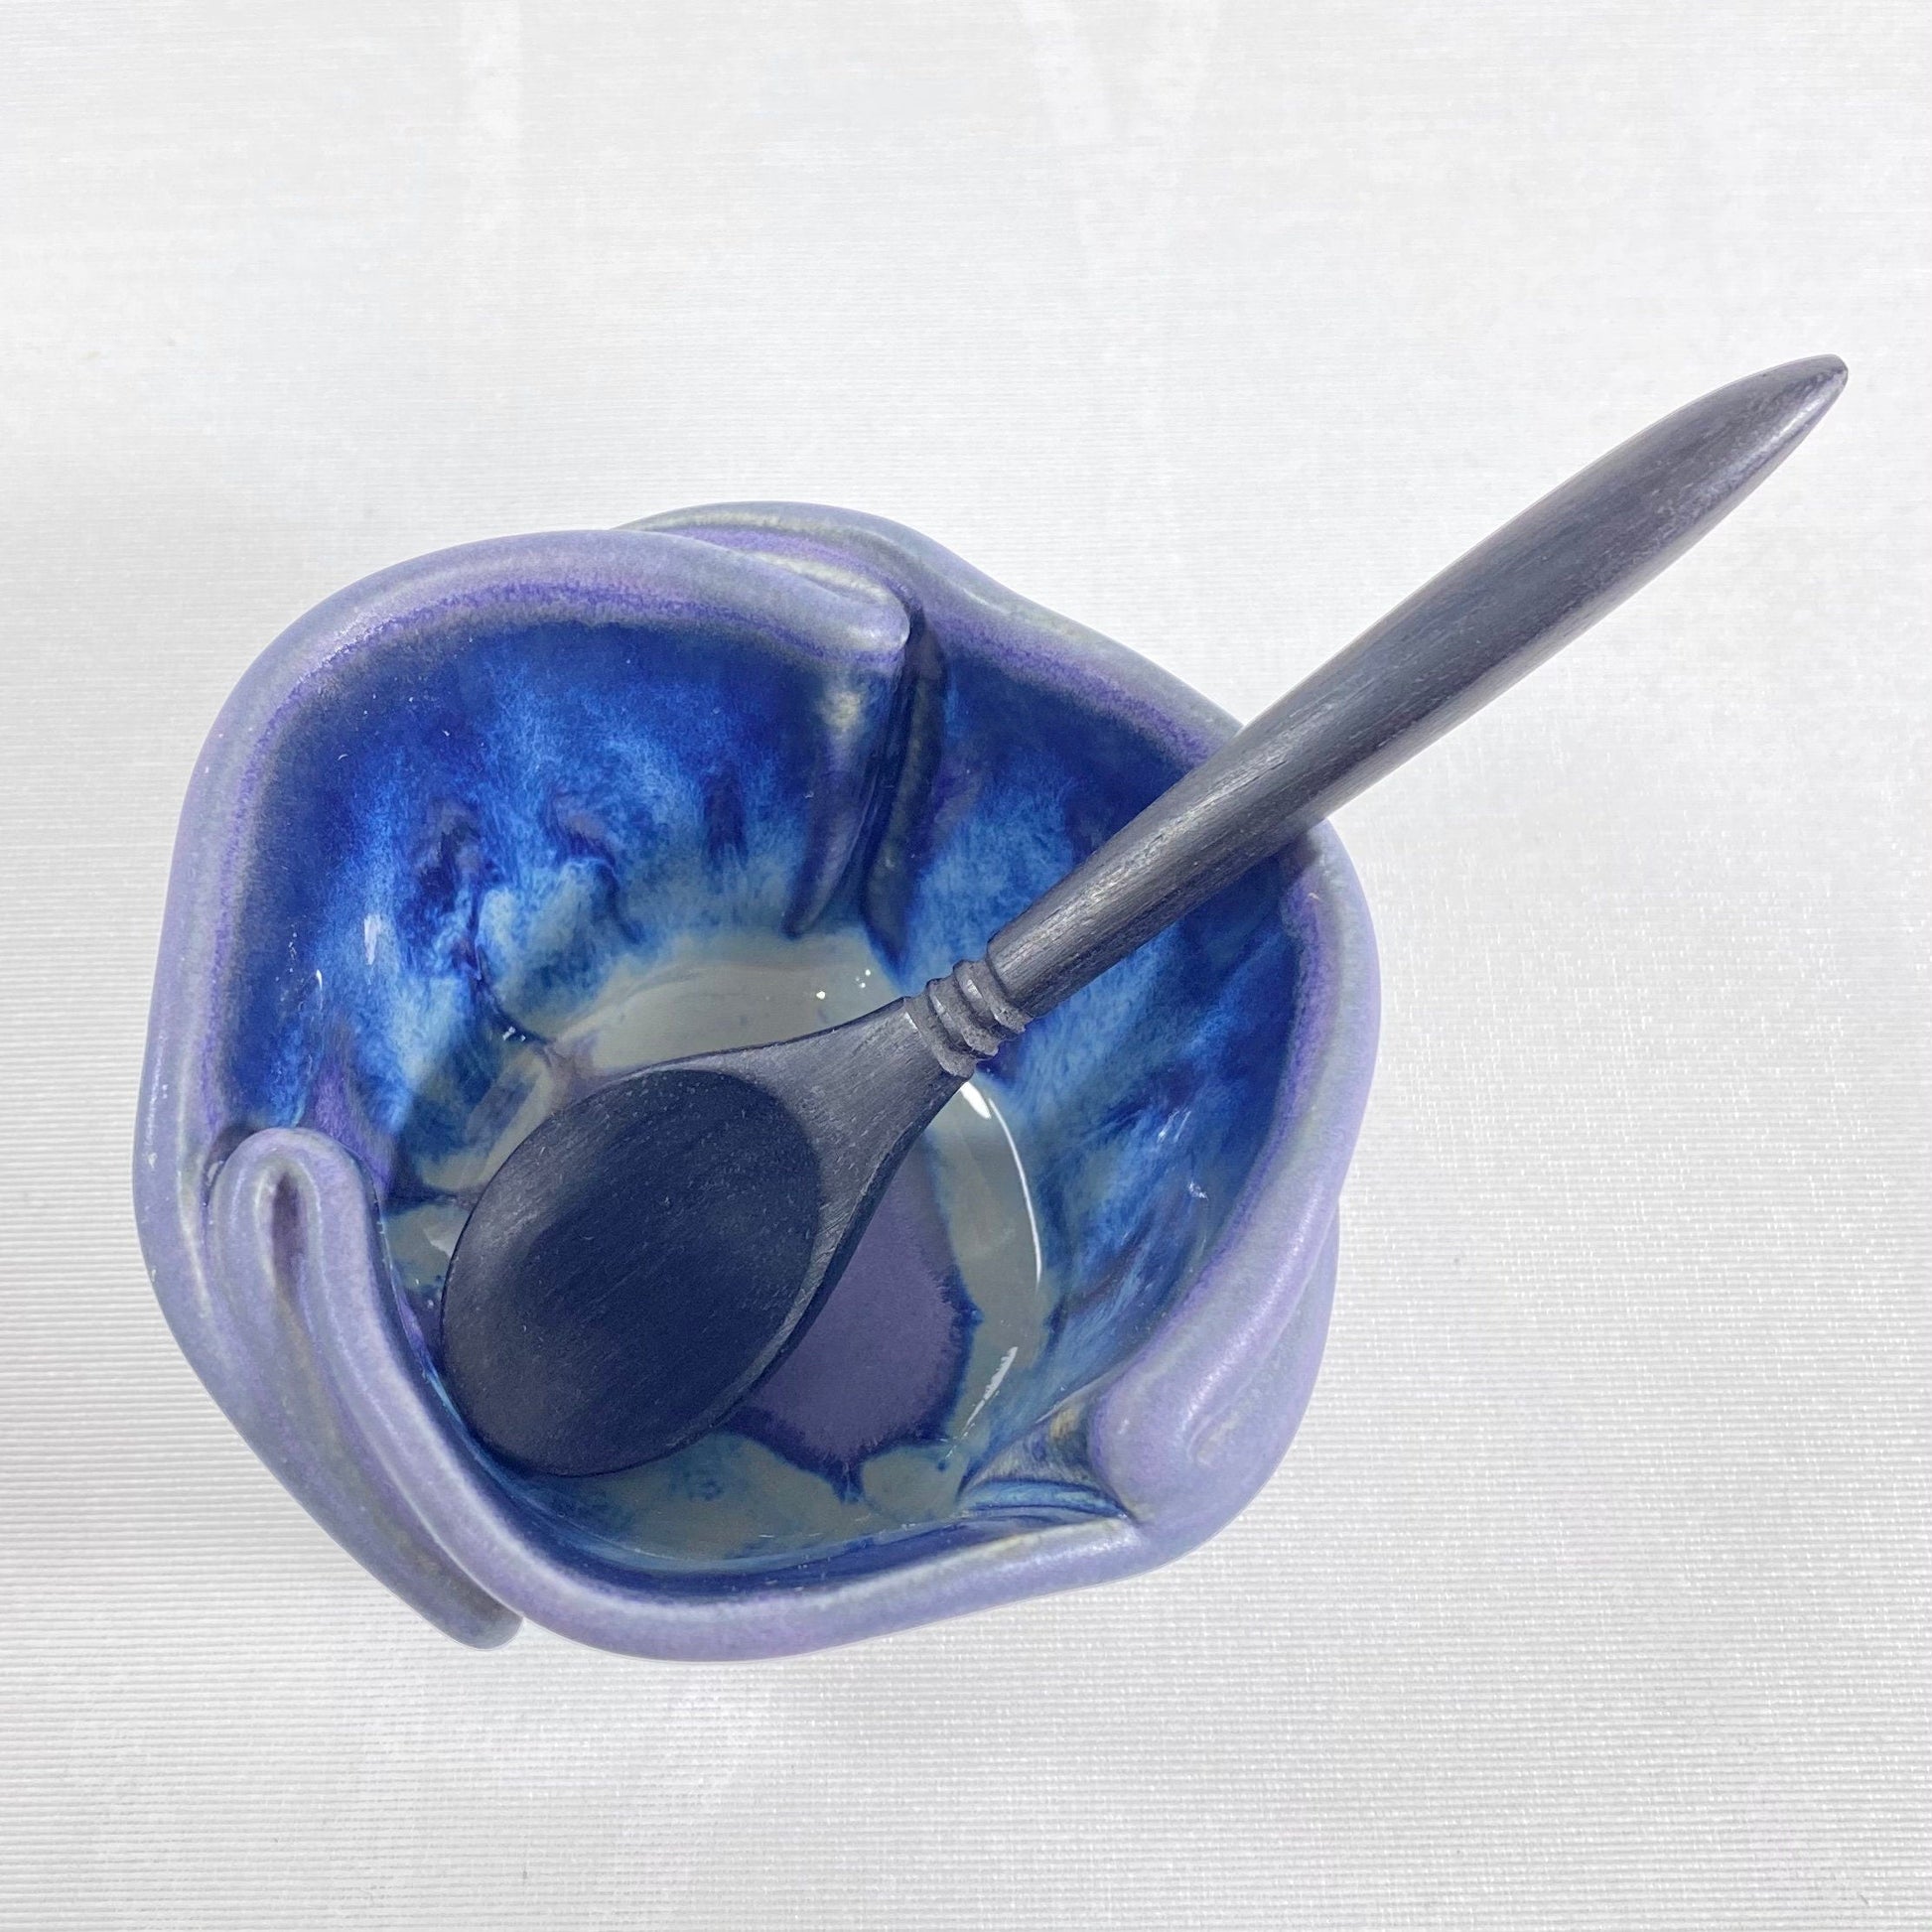 Handmade Purple and Blue Tiny Pot with Serving Spoon, Functional and Decorative Pottery